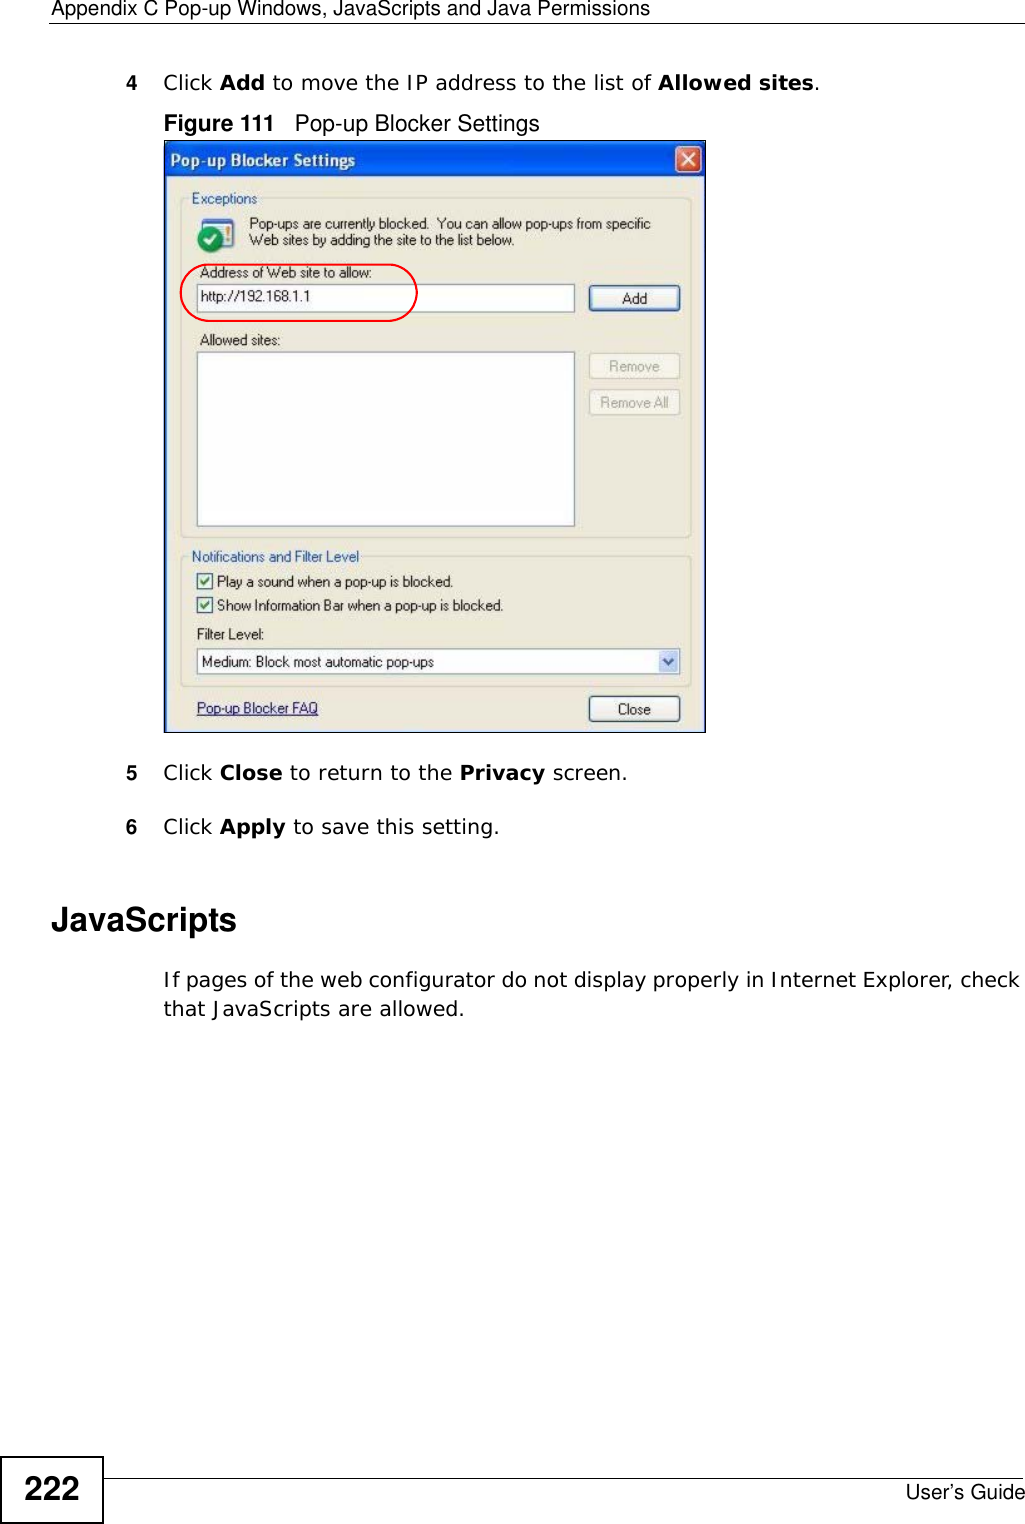 Appendix C Pop-up Windows, JavaScripts and Java PermissionsUser’s Guide2224Click Add to move the IP address to the list of Allowed sites.Figure 111   Pop-up Blocker Settings5Click Close to return to the Privacy screen. 6Click Apply to save this setting. JavaScriptsIf pages of the web configurator do not display properly in Internet Explorer, check that JavaScripts are allowed. 